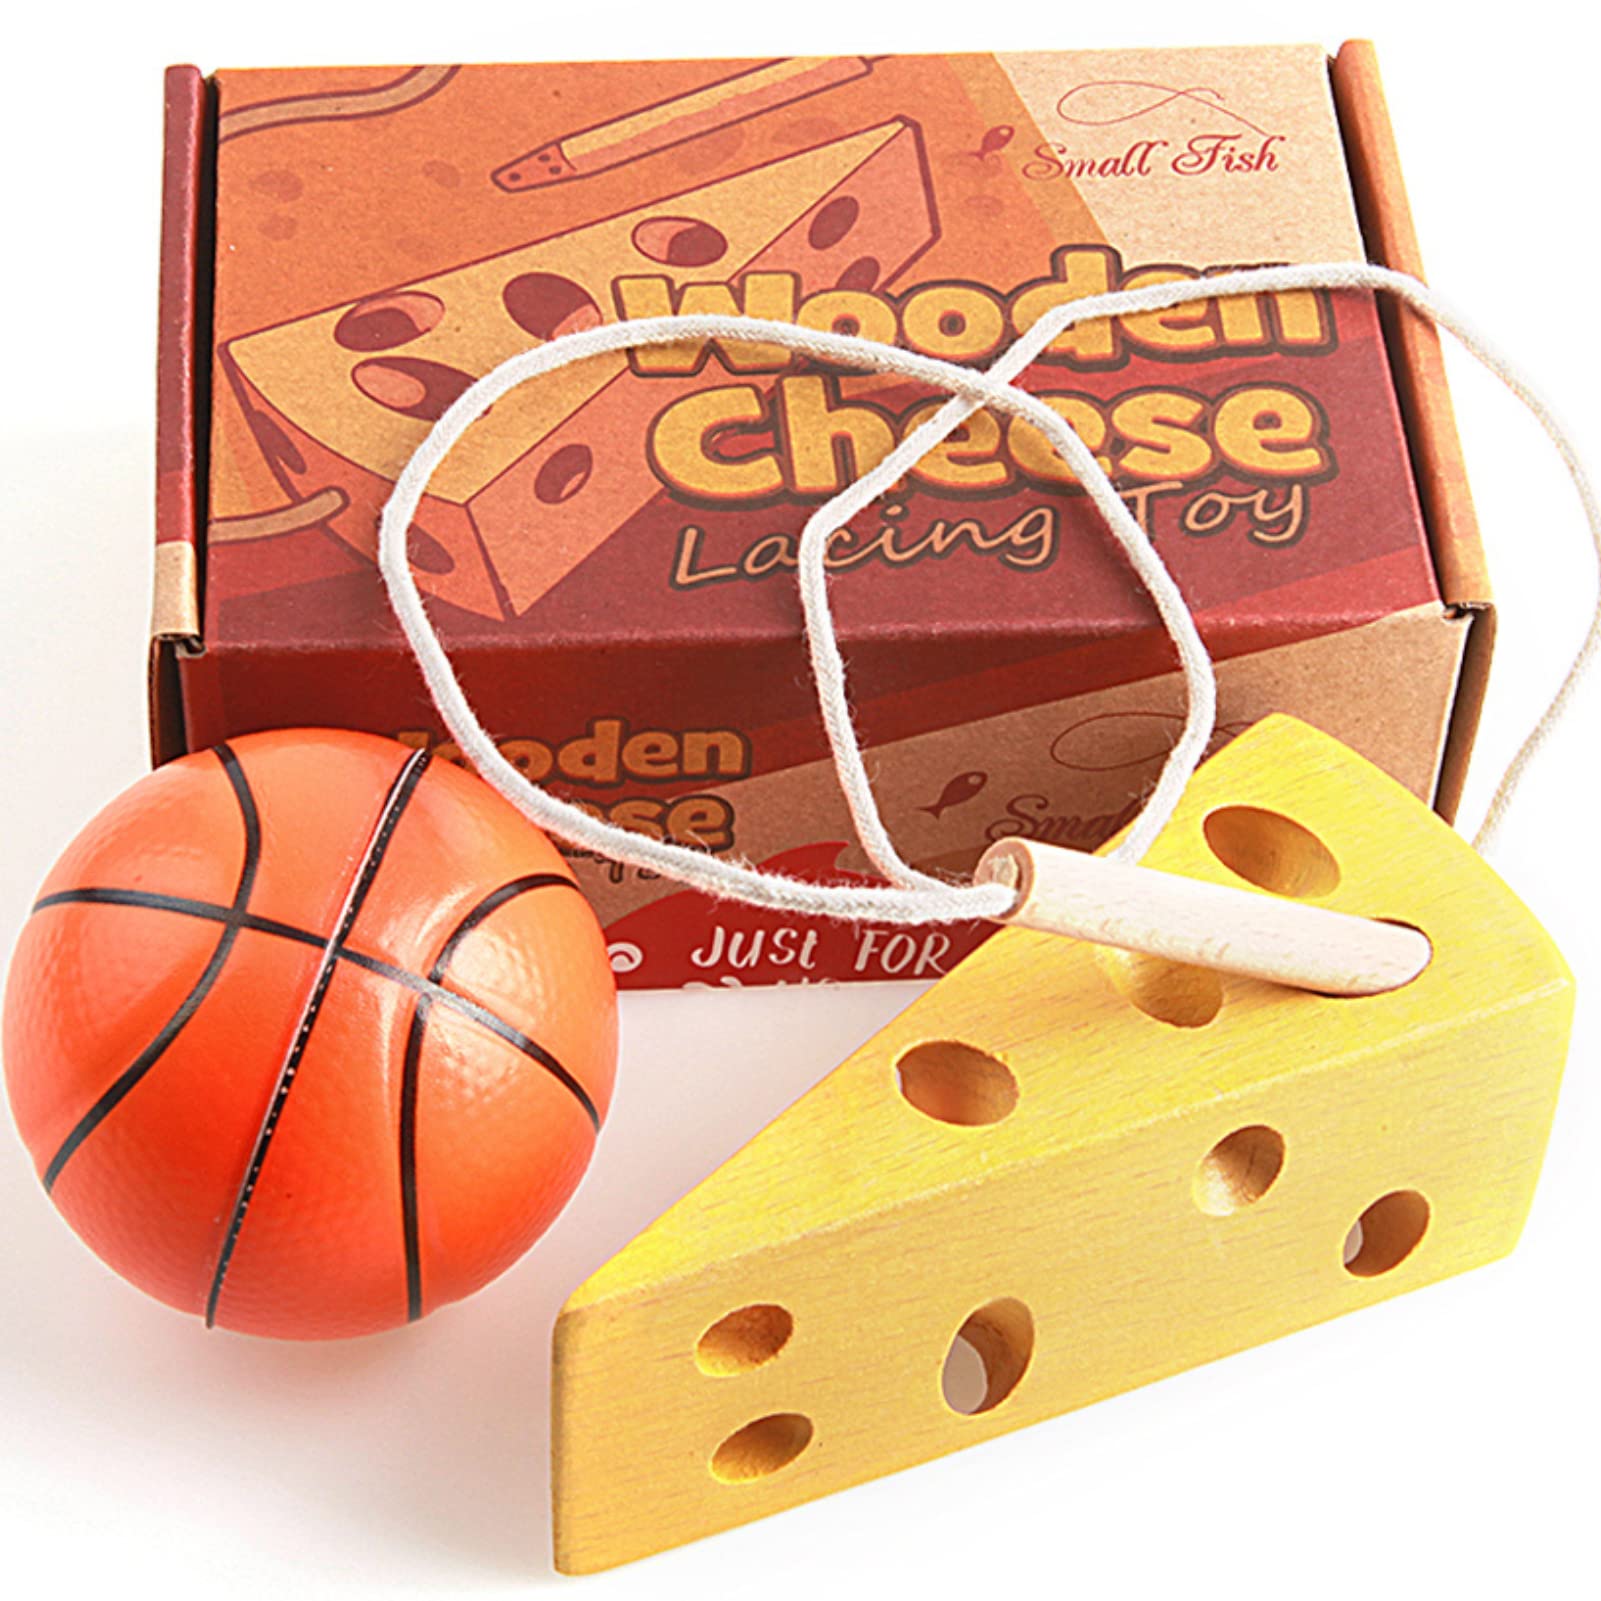 SMALL FISH Wooden Lacing Cheese Toy